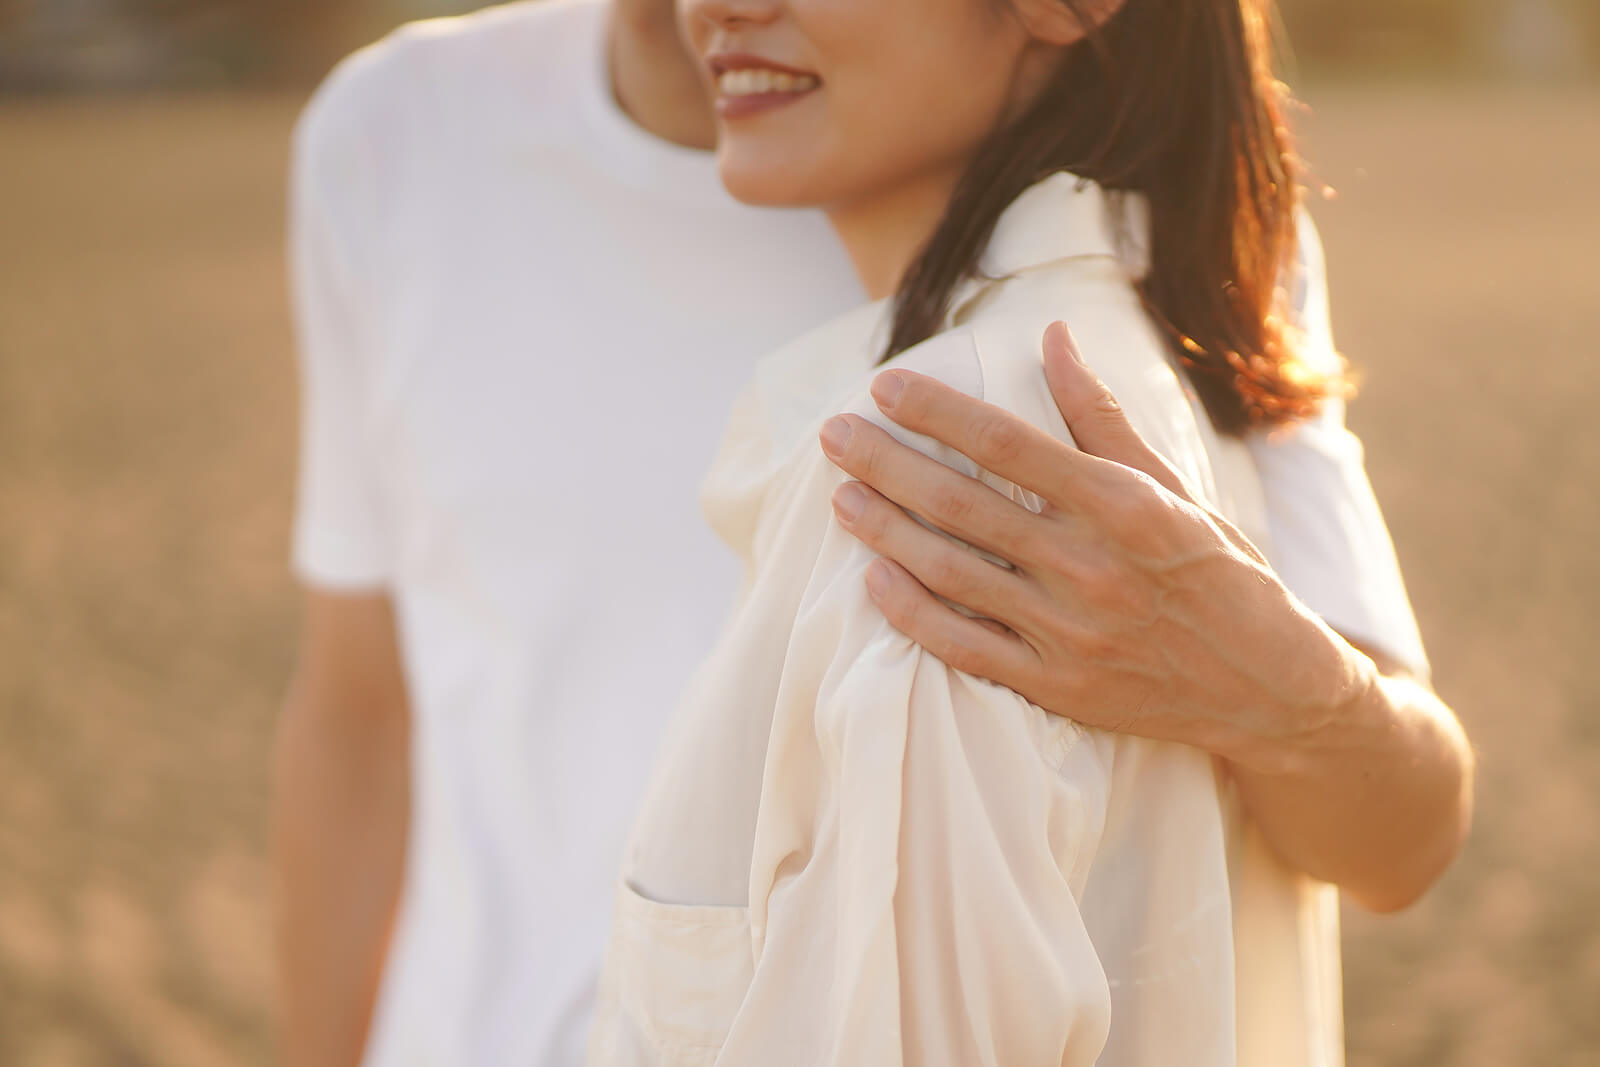 Image of a couple wearing white and standing in a field smiling. With effective communication you and your partner can work through your intimacy issues. Find support with a skilled couples therapist with couples therapy in Miami, FL.